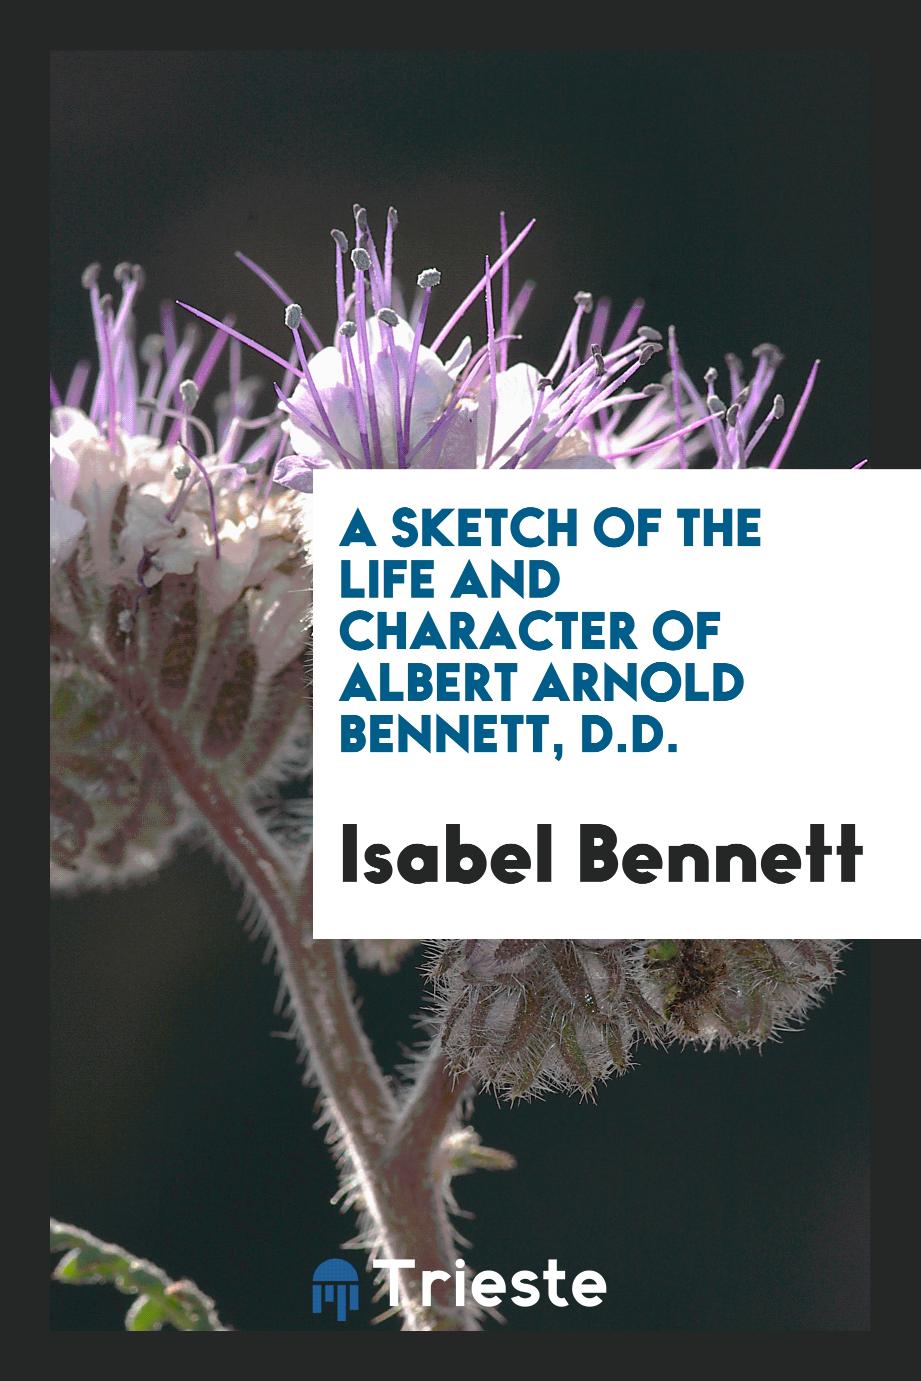 A Sketch of the Life and Character of Albert Arnold Bennett, D.D.